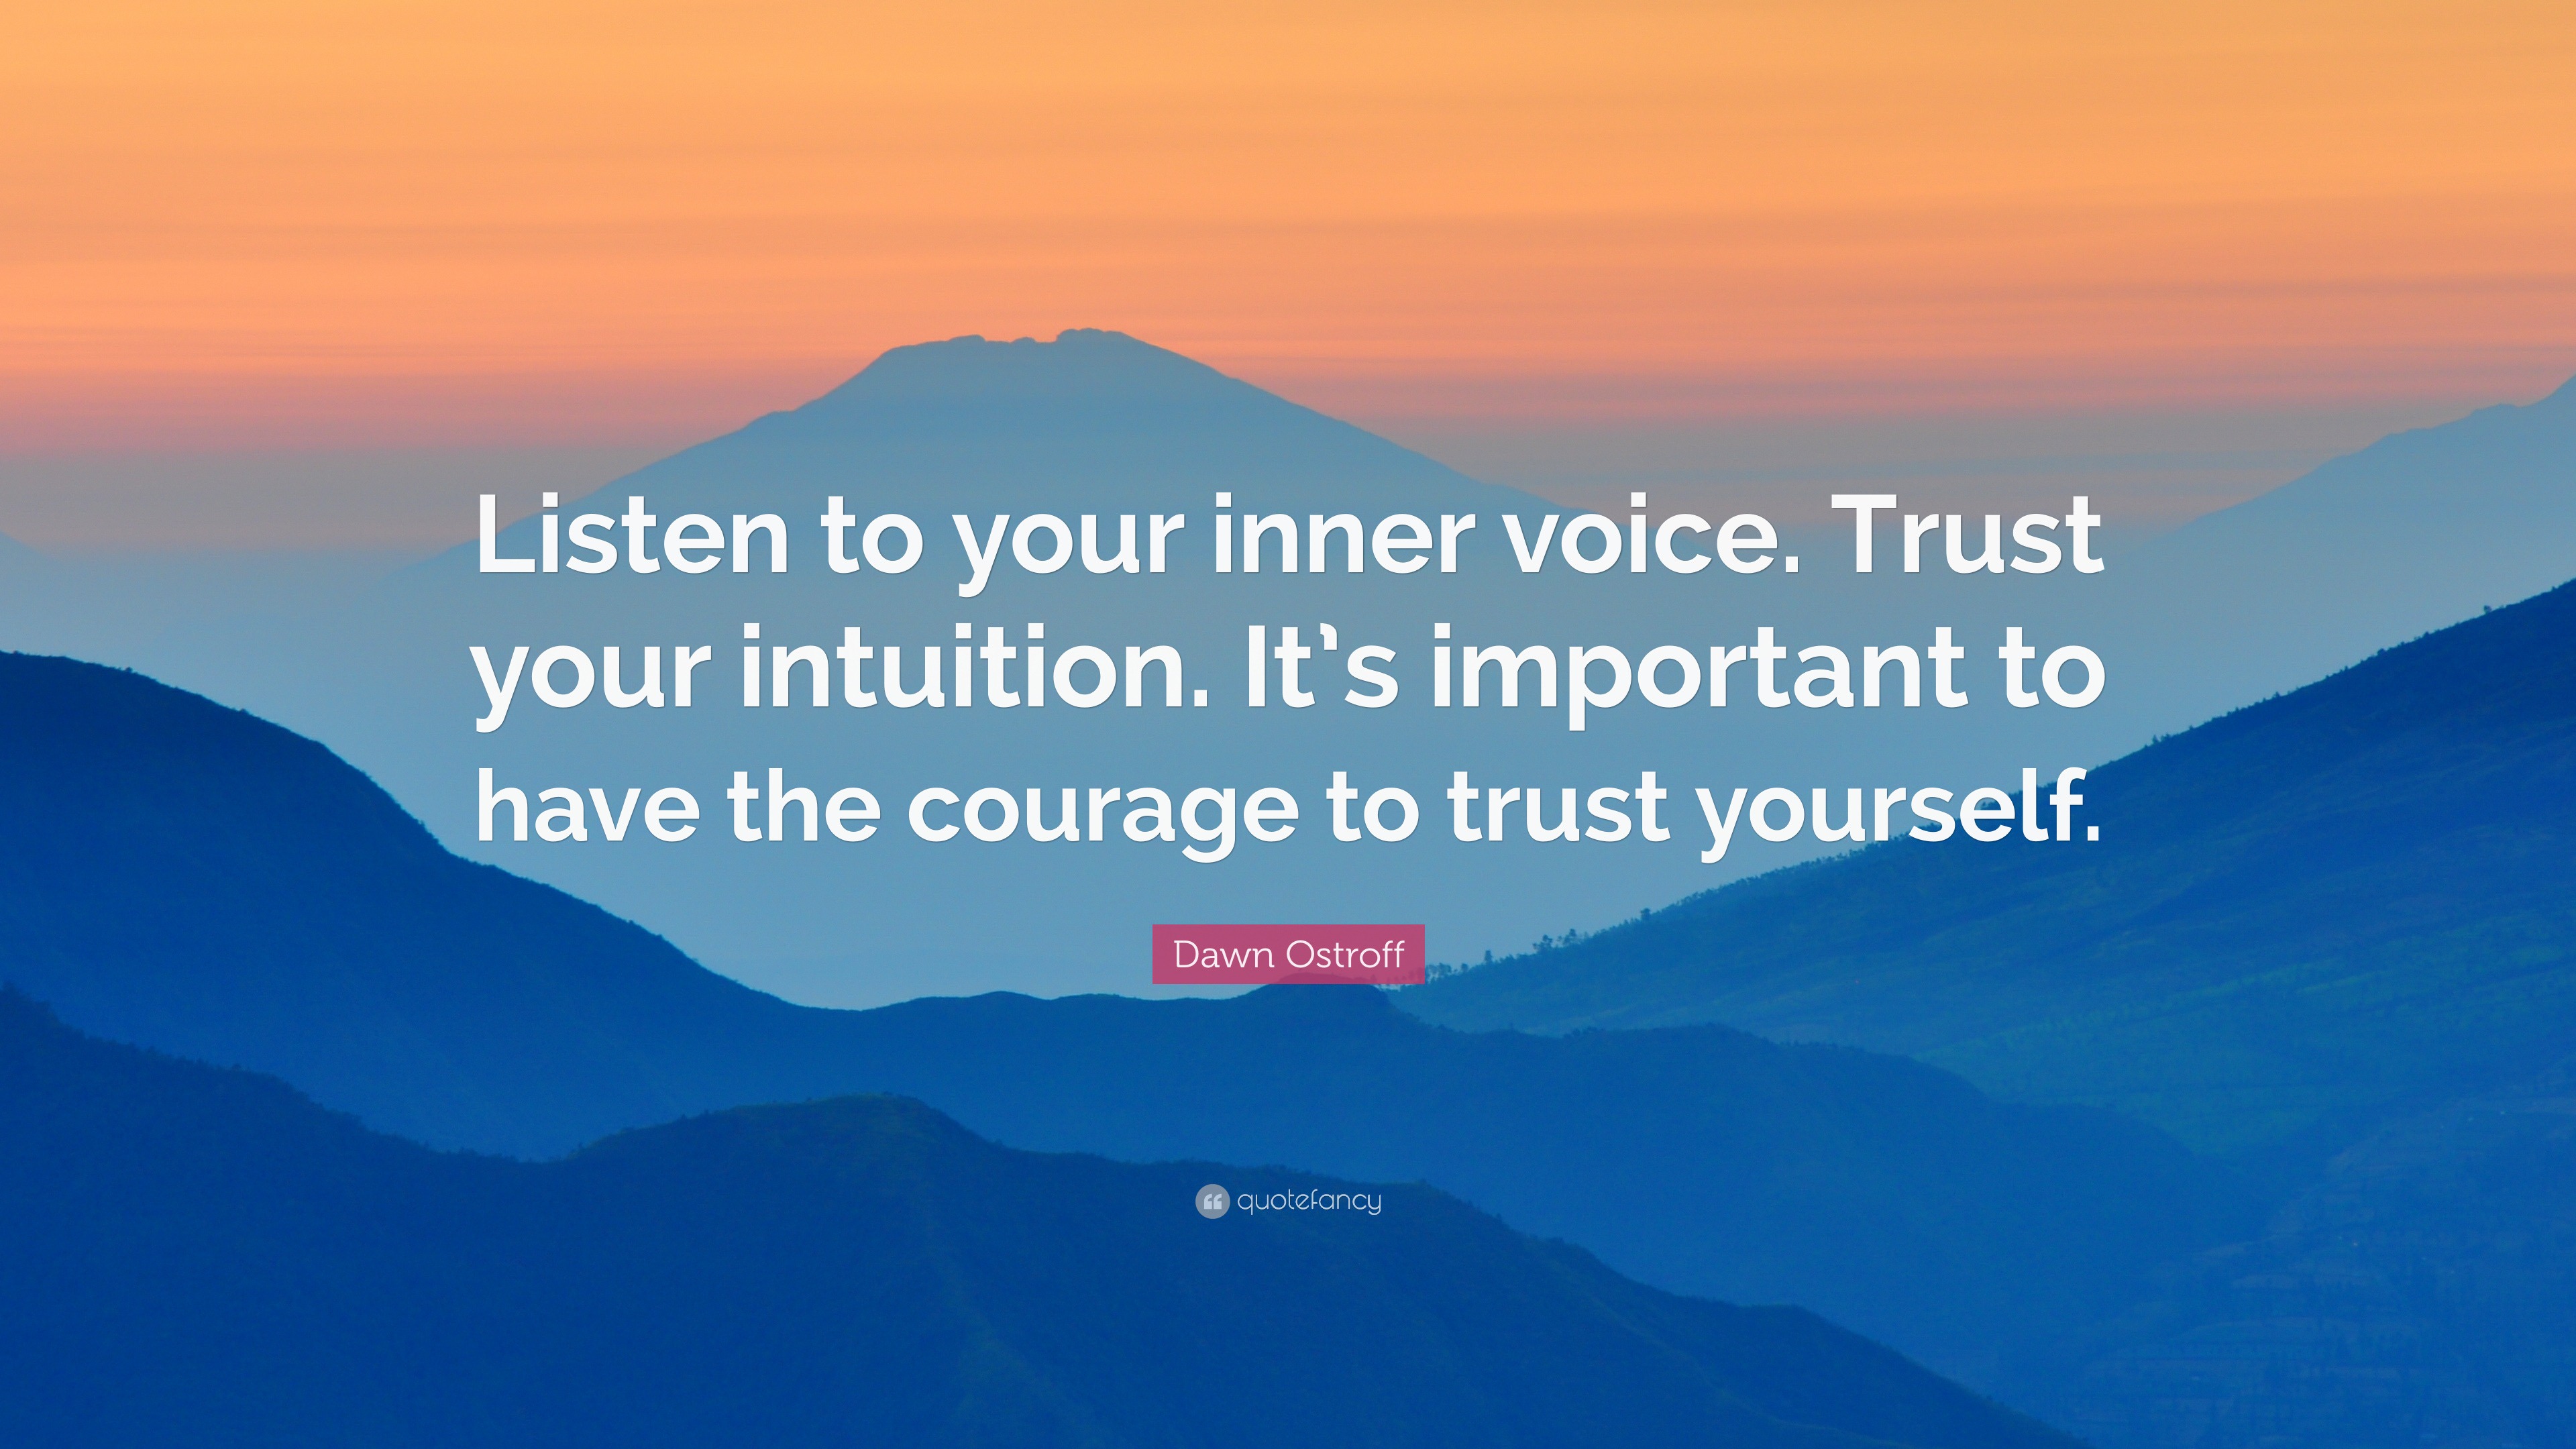 Dawn Ostroff Quote: “Listen to your inner voice. Trust your intuition ...